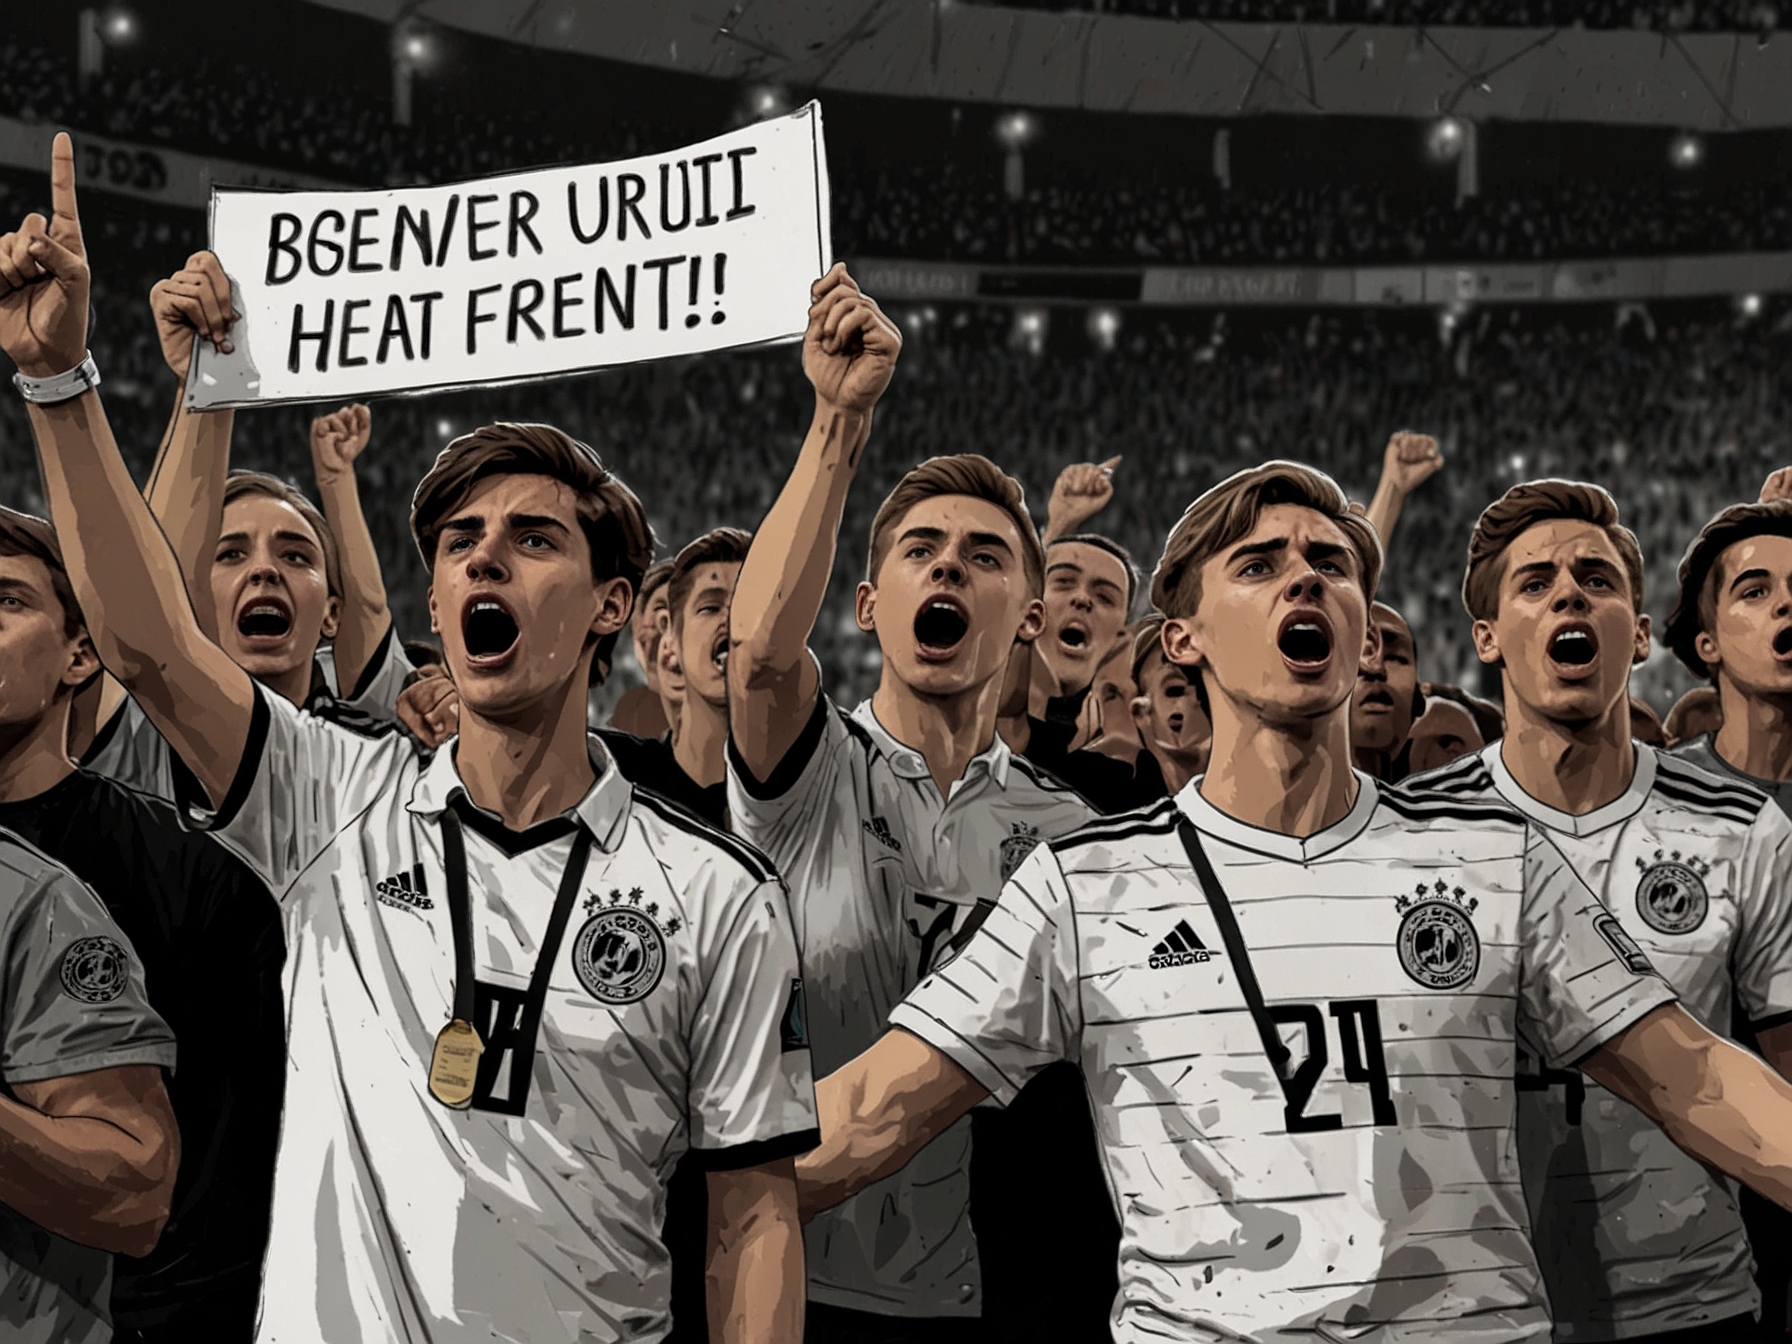 Germany fans expressing their frustration in stands, holding banners with messages demanding the benching of Kai Havertz after his underwhelming performance against Switzerland.